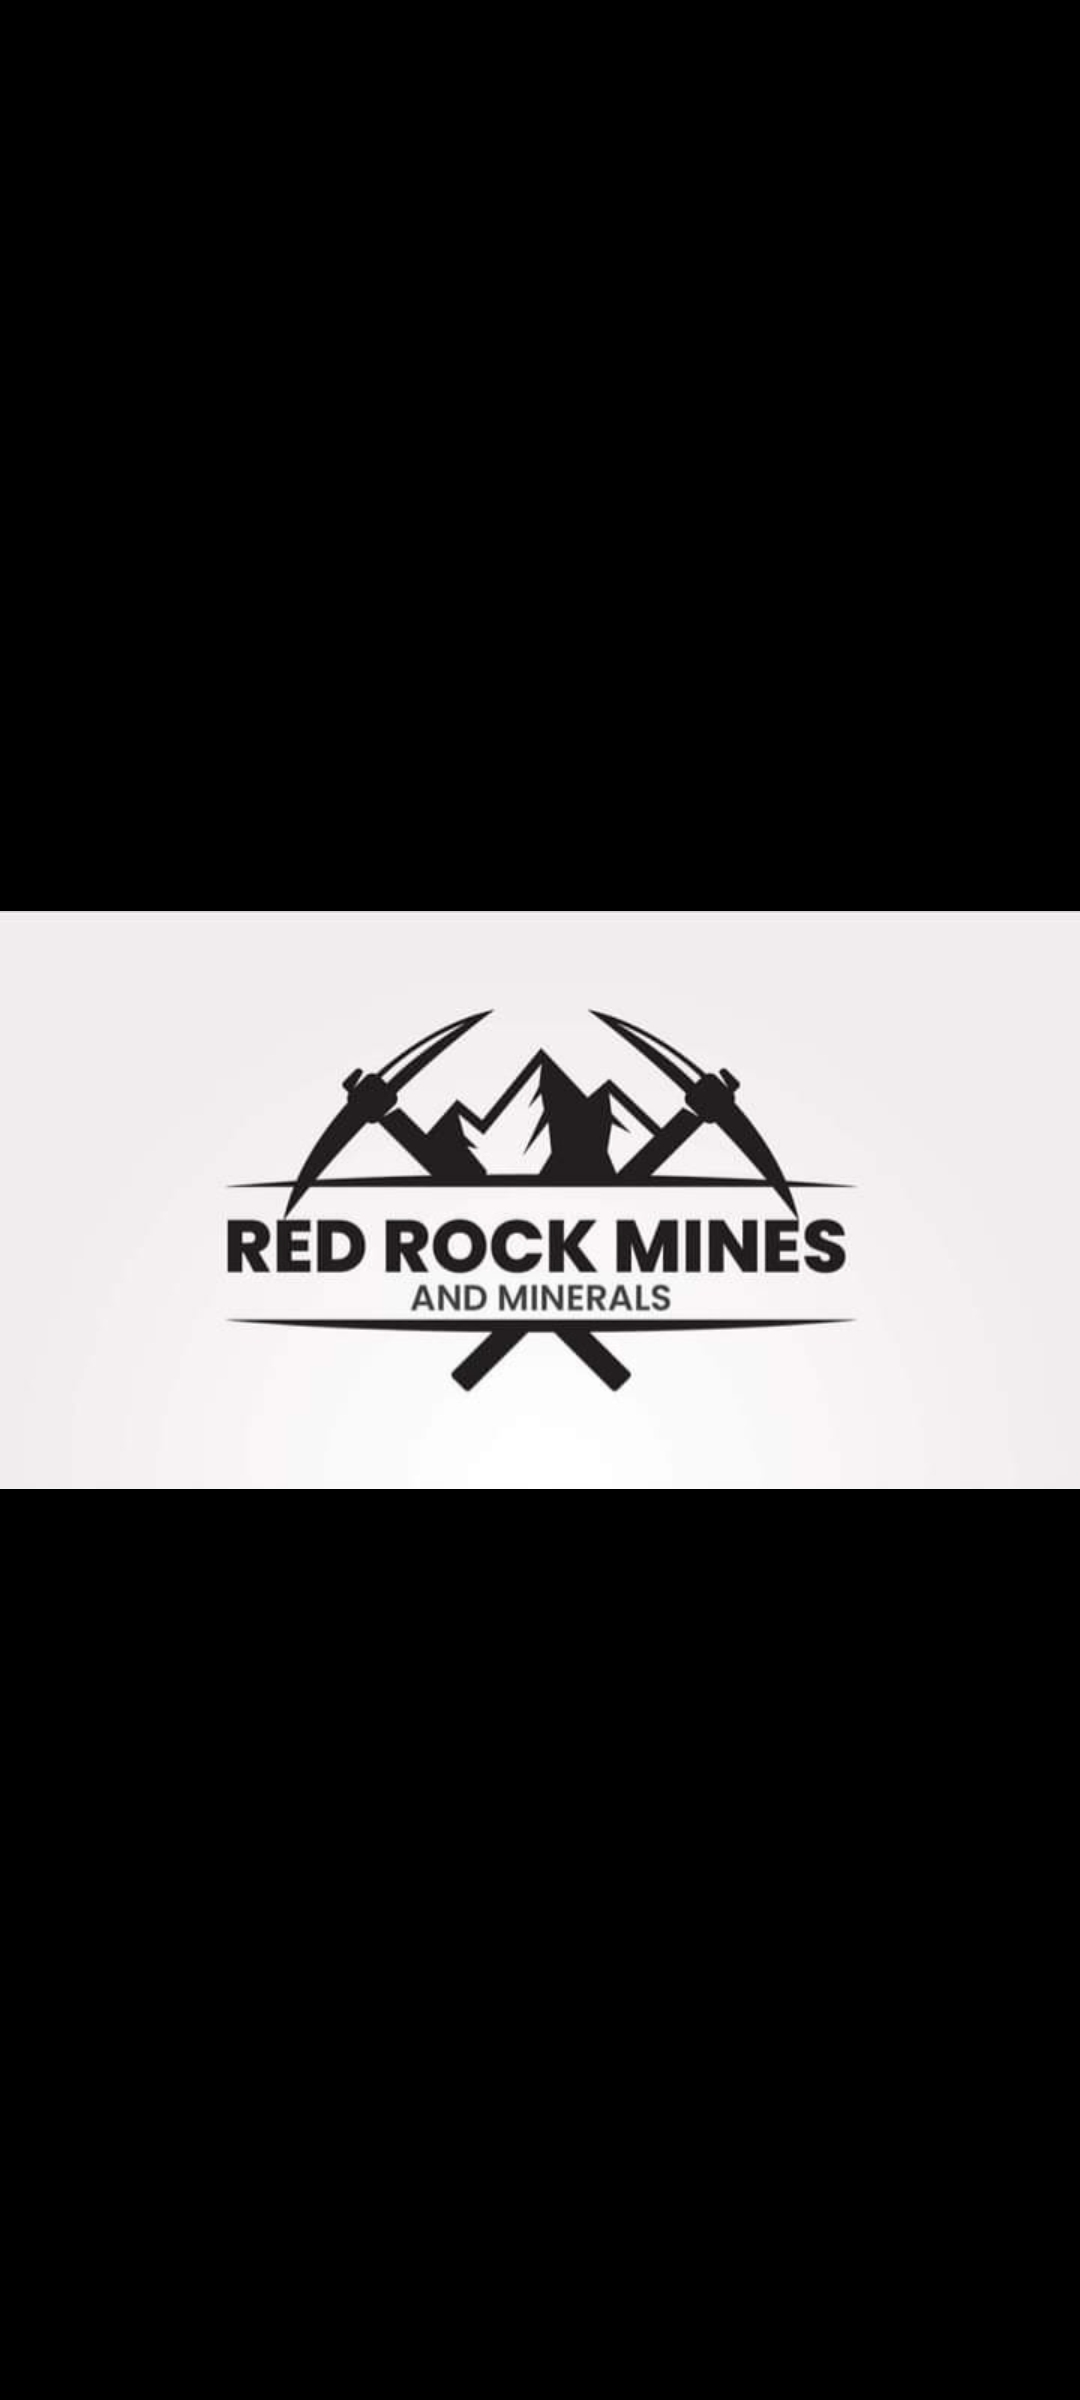 RED ROCK MINES AND MINERALS